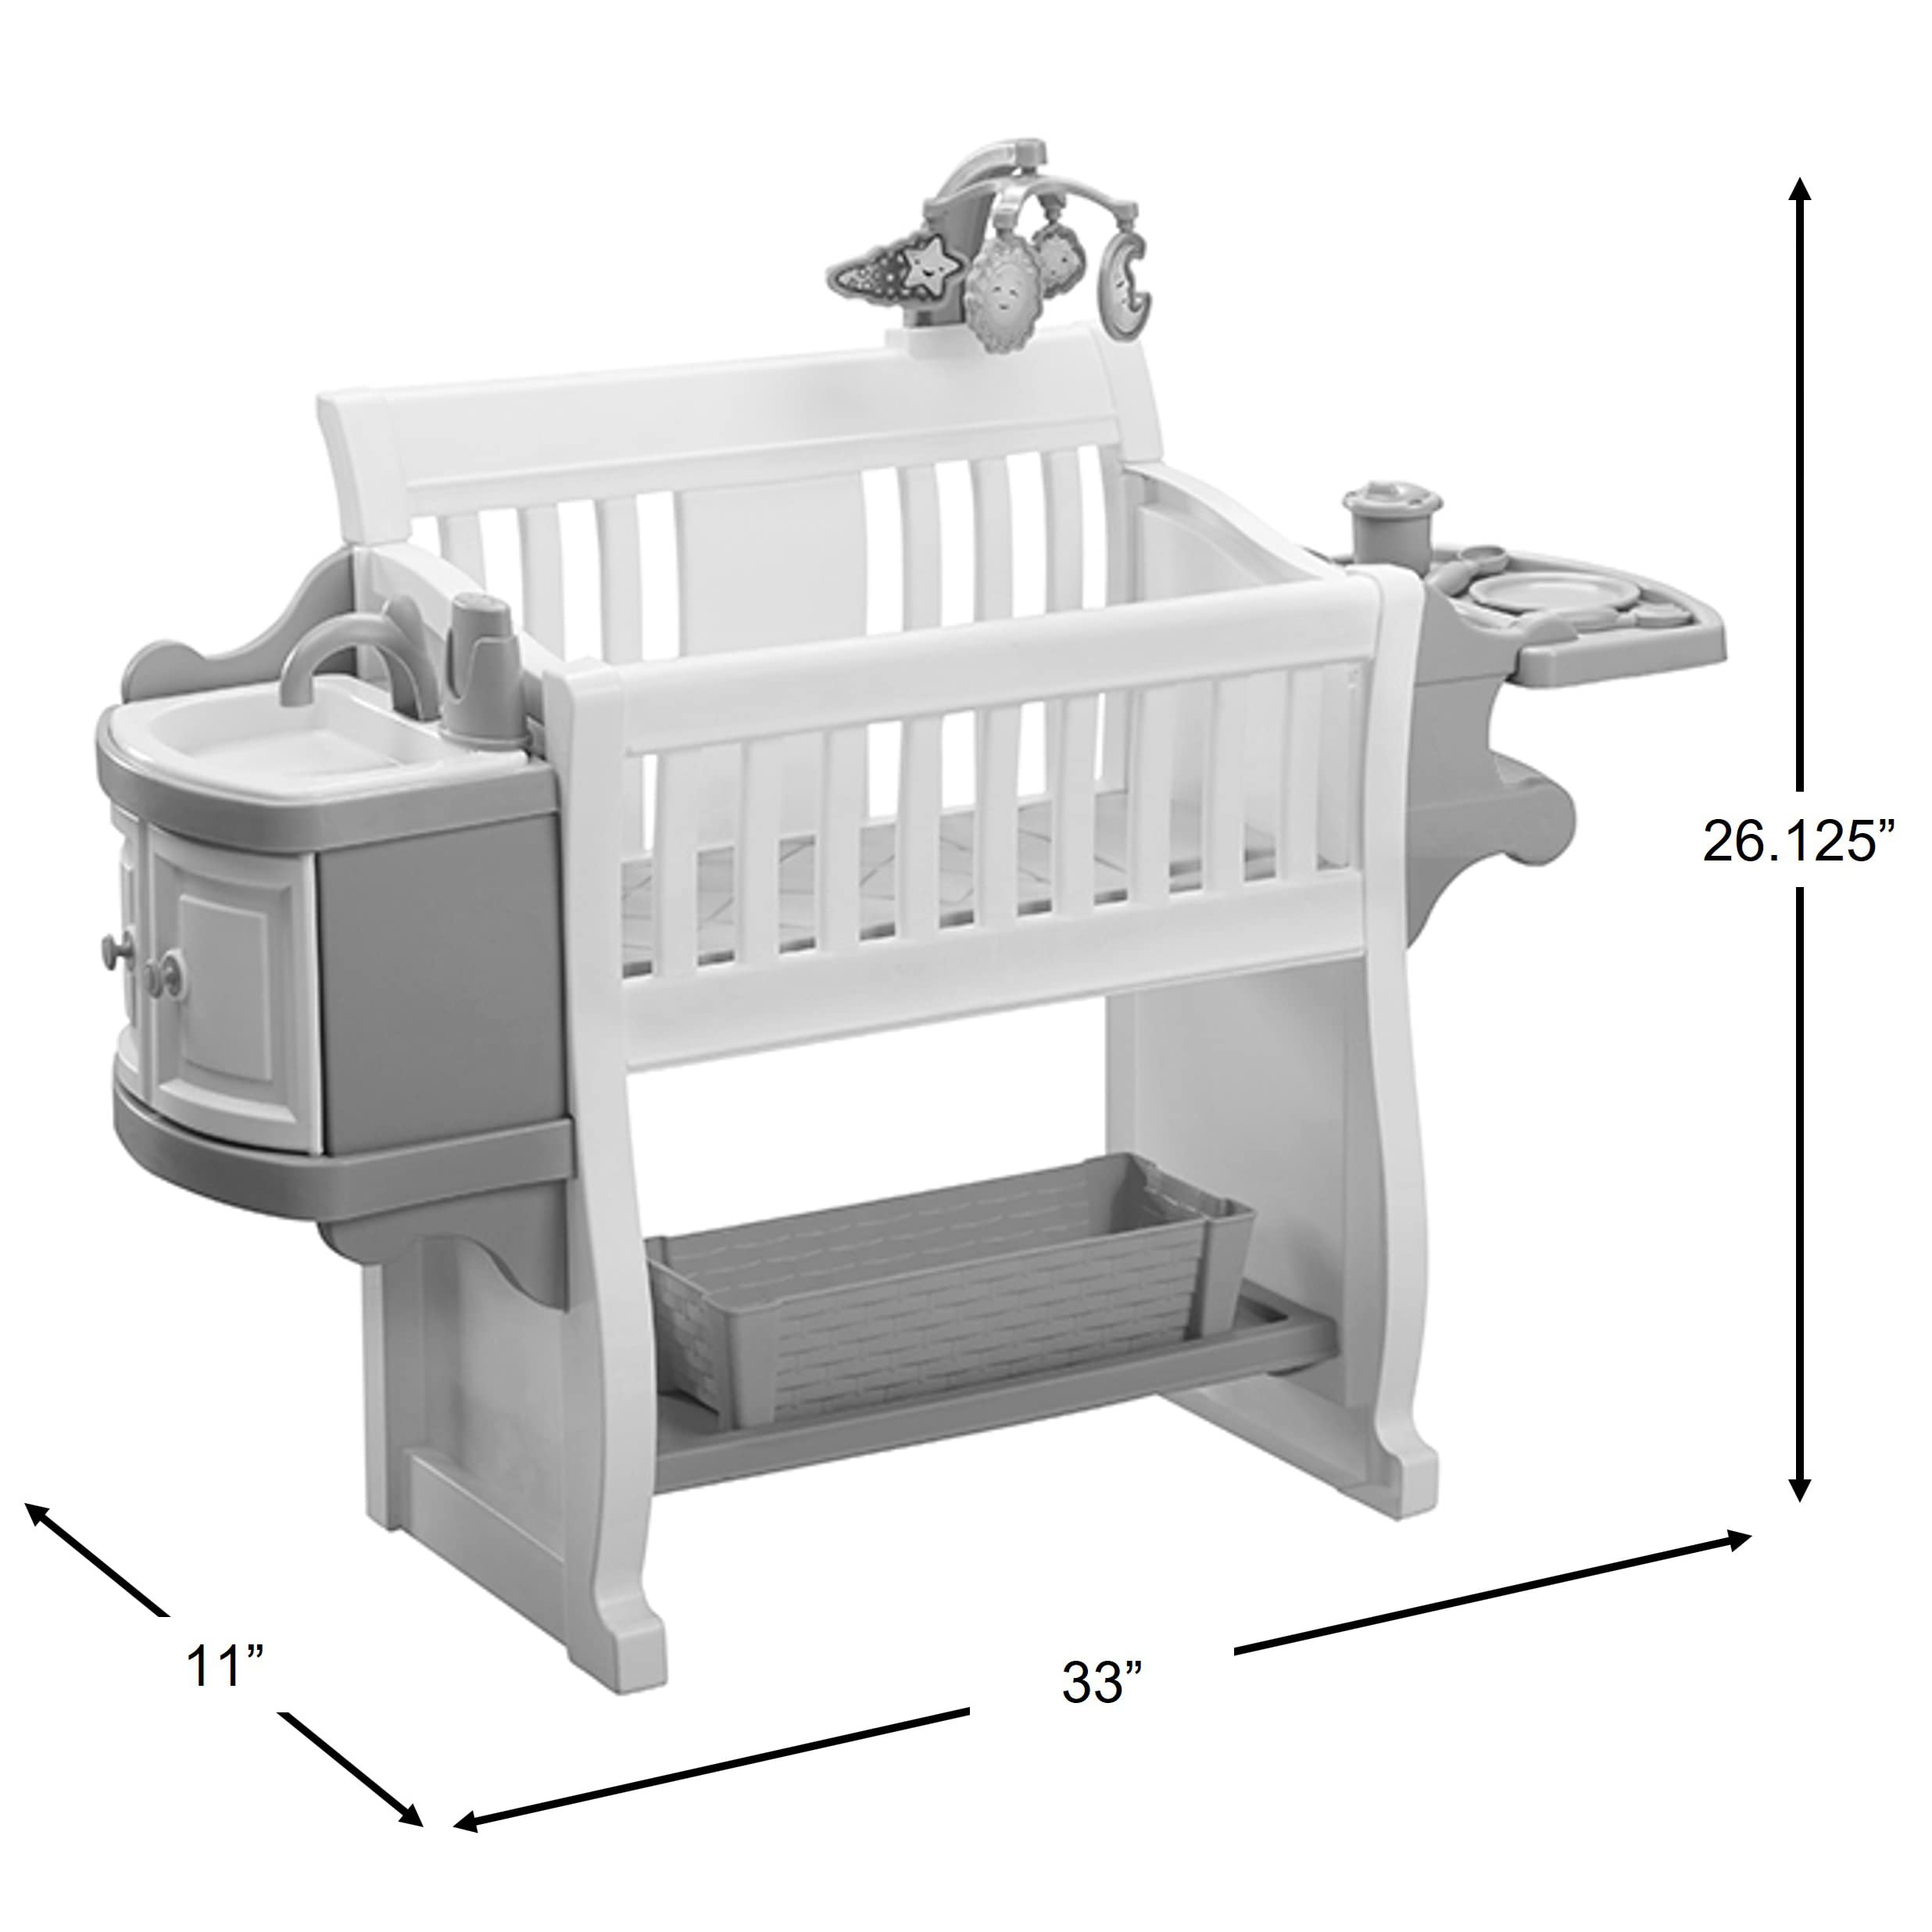 American Plastic Toys Kids’ My Very Own Nursery Baby Doll Playset, Furniture, Crib, Feeding Station, Learn to Nurture and Care, Durable and BPA-Free Plastic, for Children Ages 2+